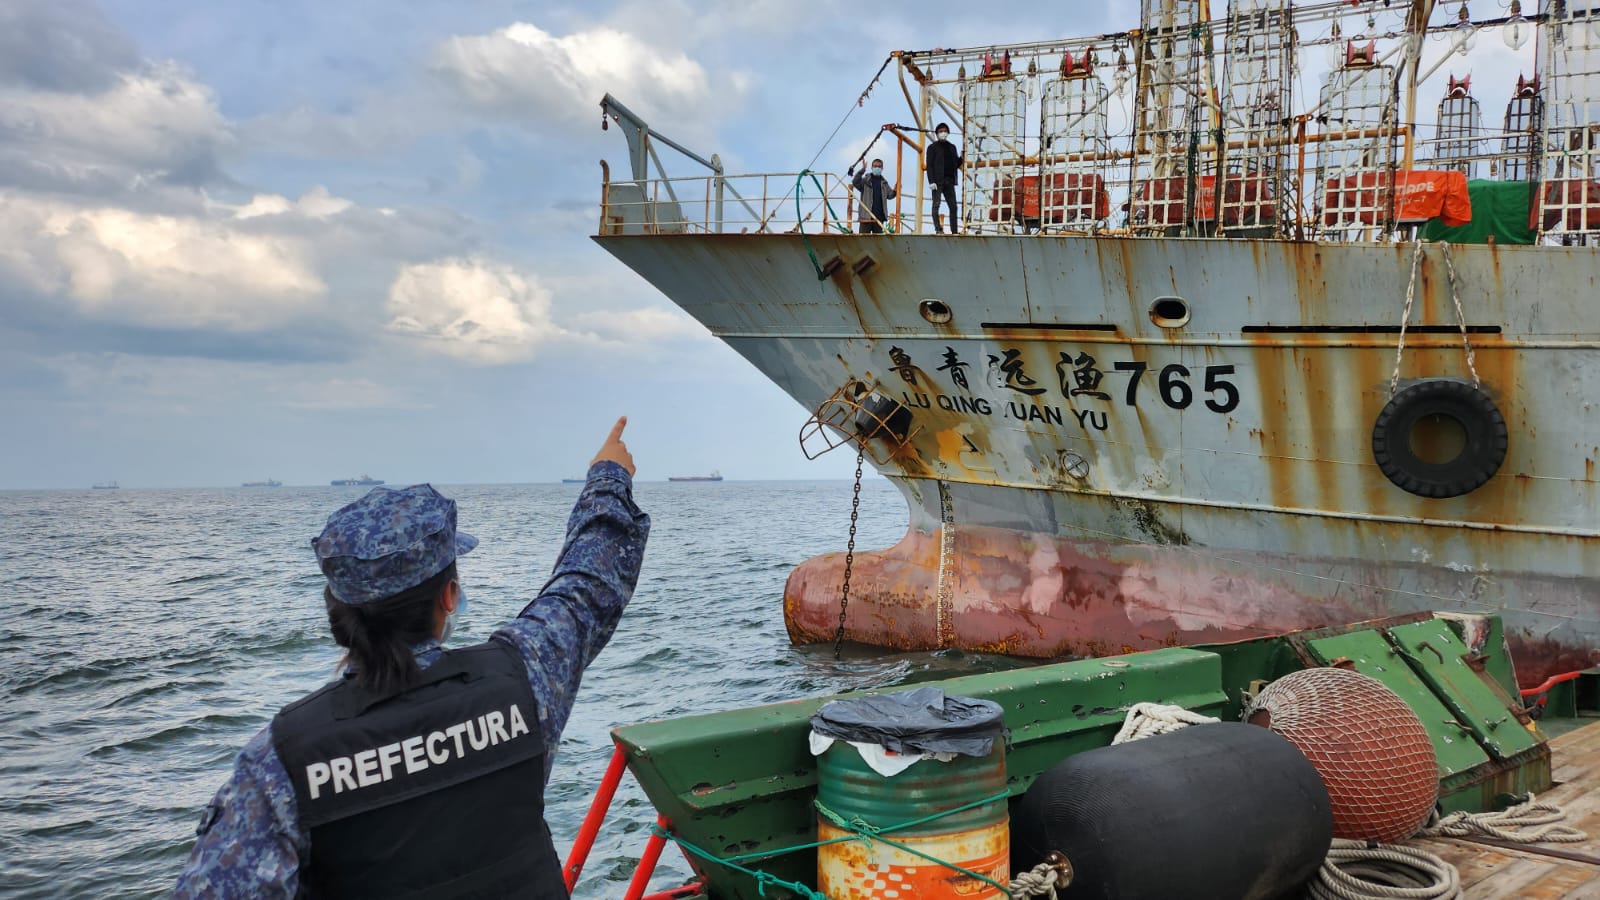 Uruguay: Message in a Bottle Highlights Forced Labor in Chinese Fishing Fleet